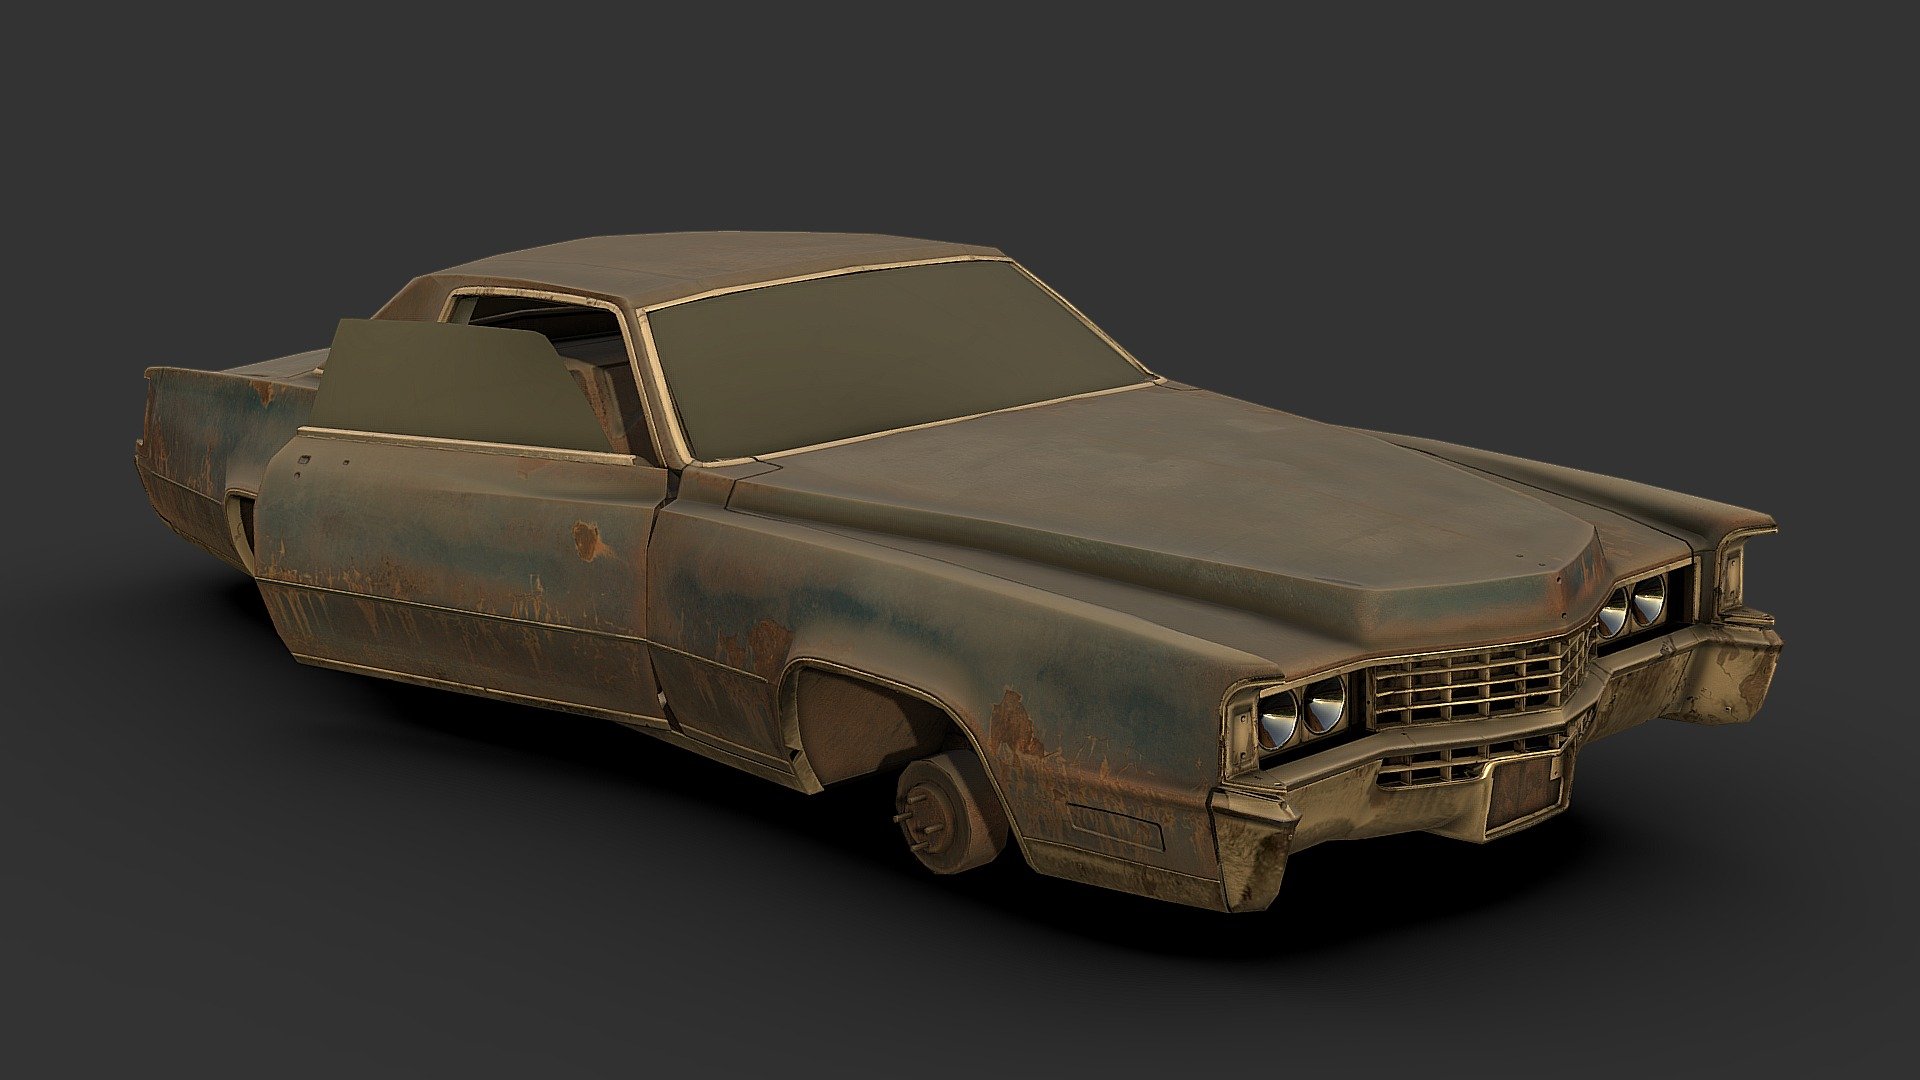 an absolute boat of a car from the 1970s, beached and abandoned

Made in 3DSMax and Substance Painter

Questions? Interested in a custom model? Want me working on your project? Feel free to contact me via artstation at: https://www.artstation.com/renafox3d - Shipwrecked Landyacht - Buy Royalty Free 3D model by Renafox (@kryik1023) 3d model